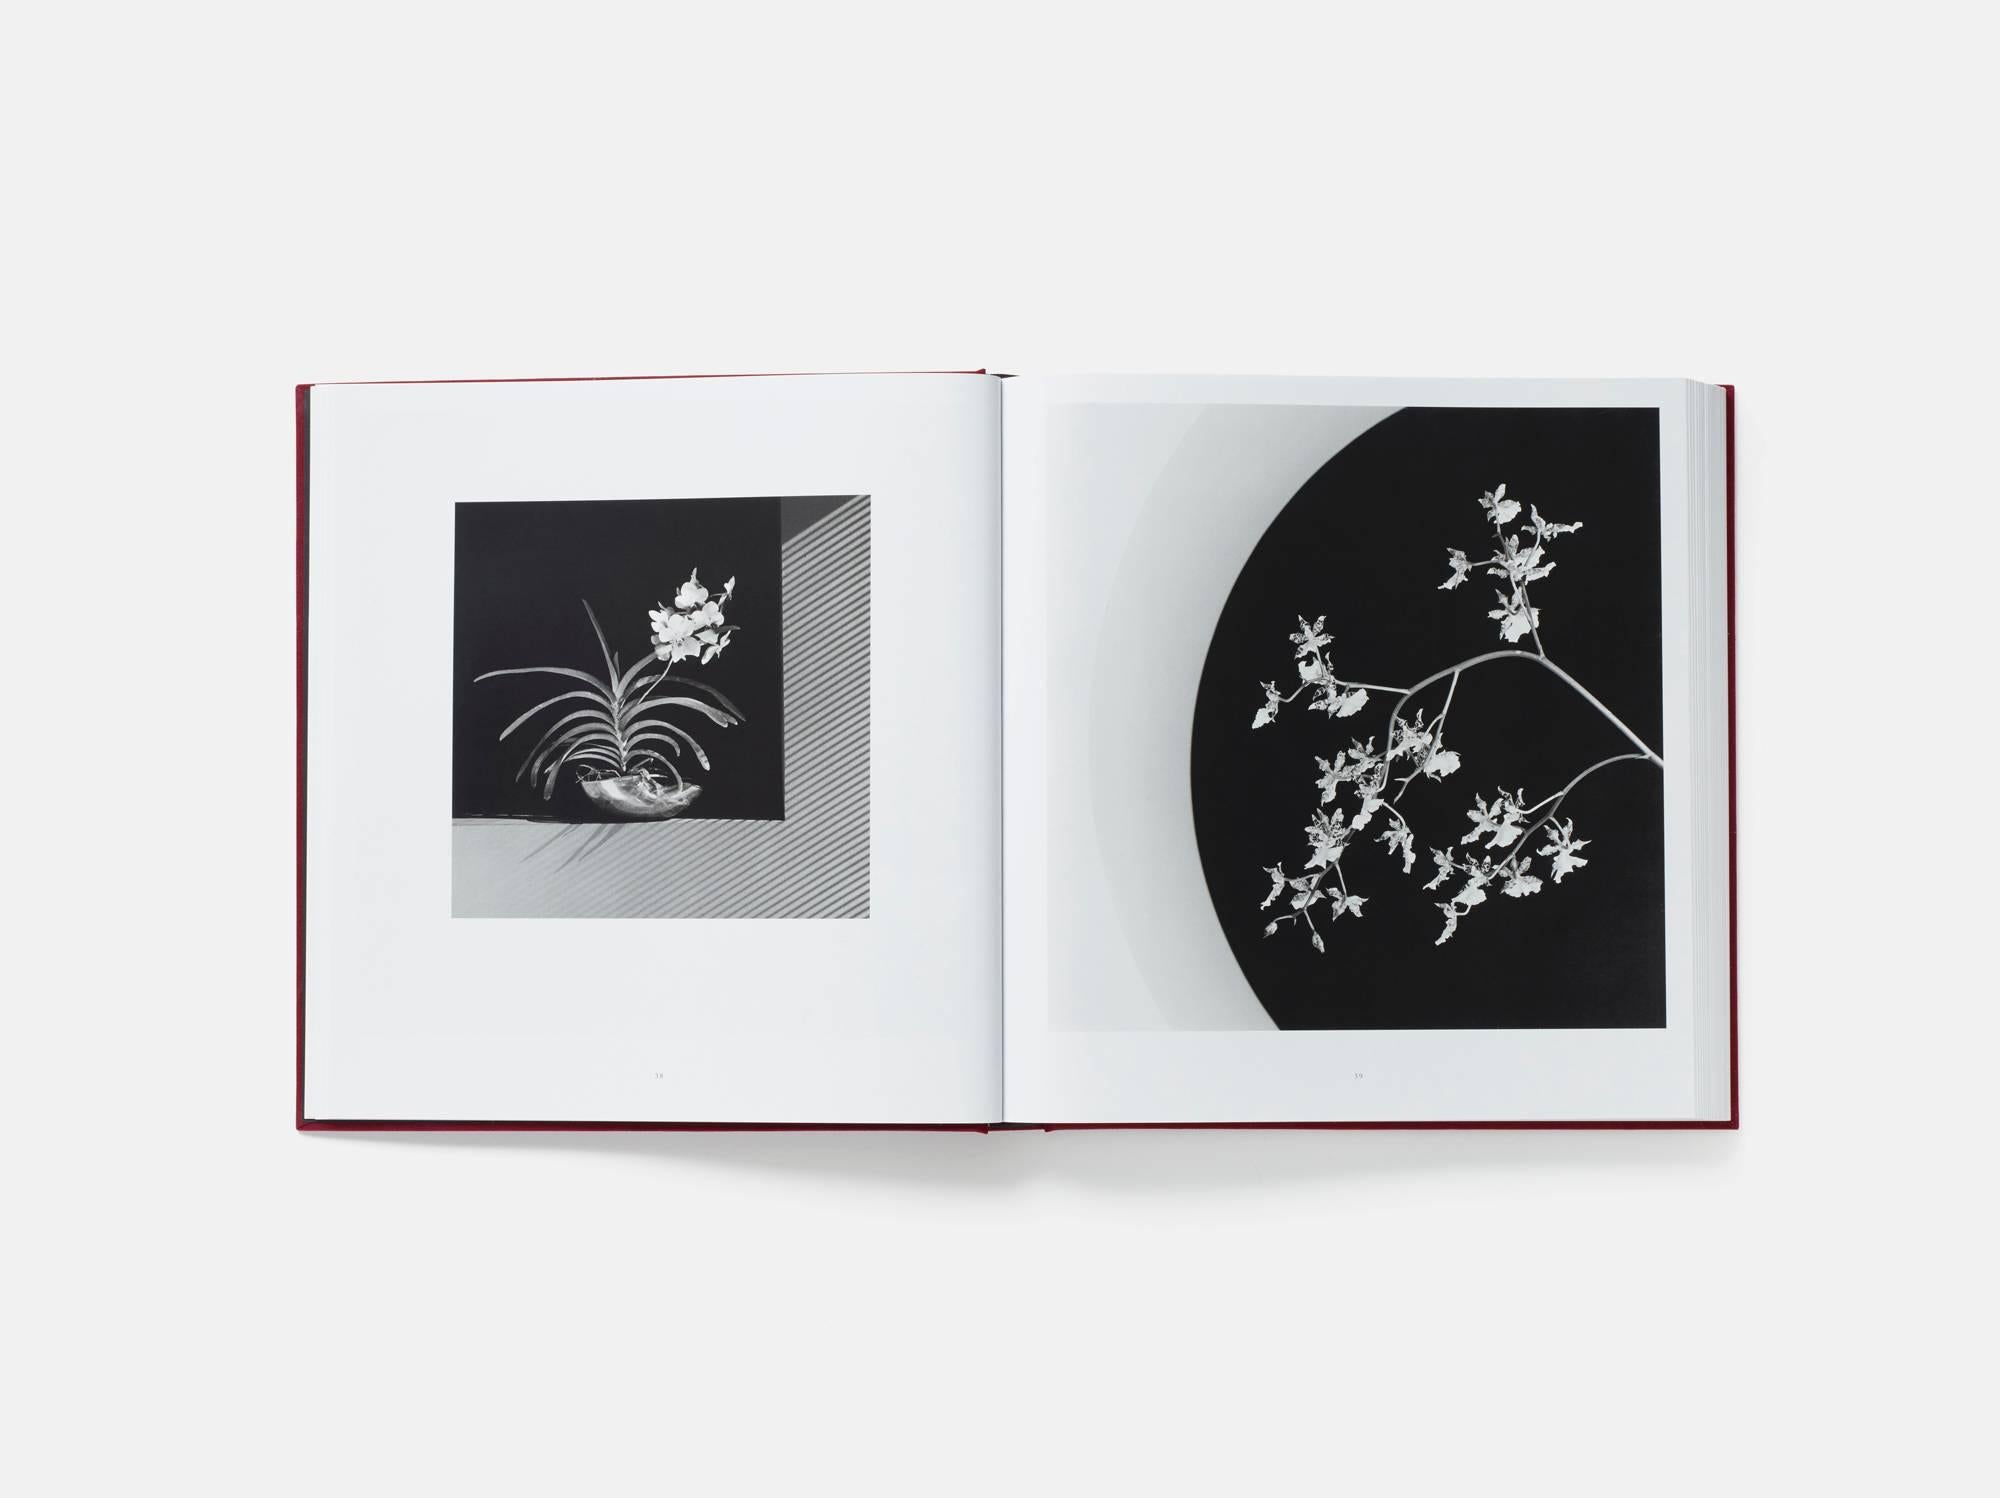 The definitive collection of Robert Mapplethorpe's flower photographs.

Robert Mapplethorpe (1946–1989) is one of the 20th century's most important artists, known for his groundbreaking and provocative work. He studied painting, drawing, and